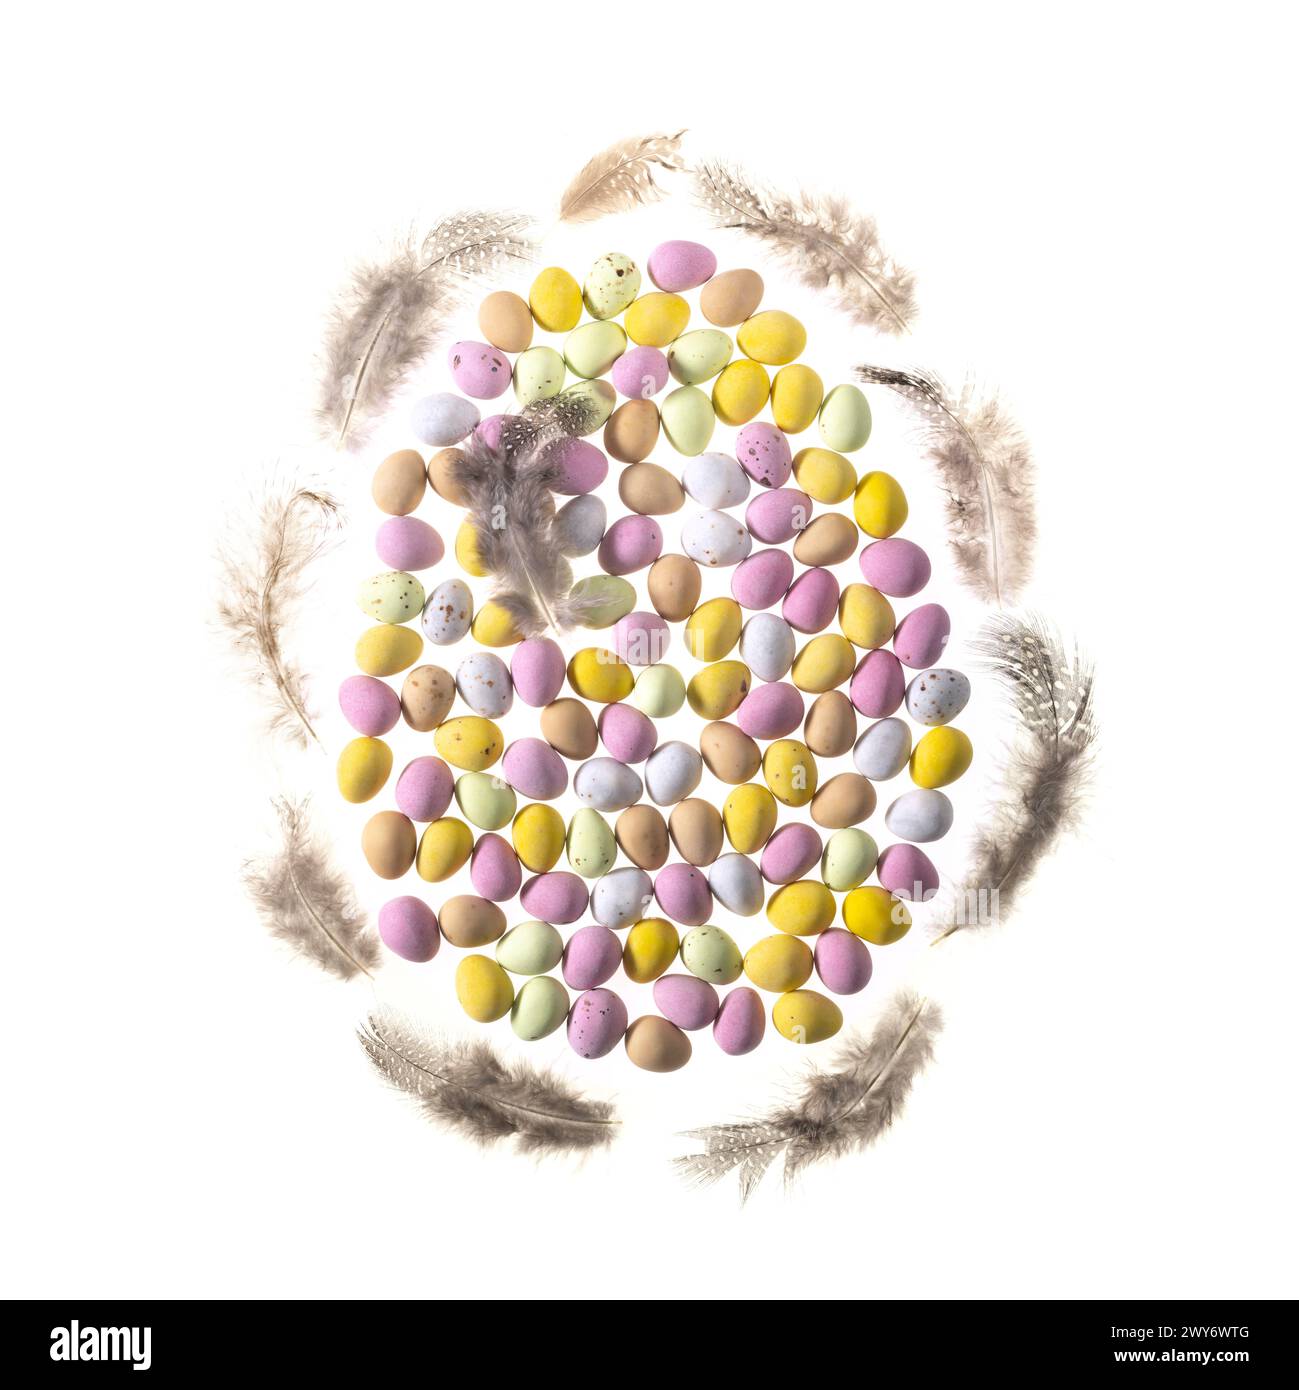 Pastel coloured sugar-coated mini eggs arranged in an egg shape edged with feathers on a white background. Stock Photo